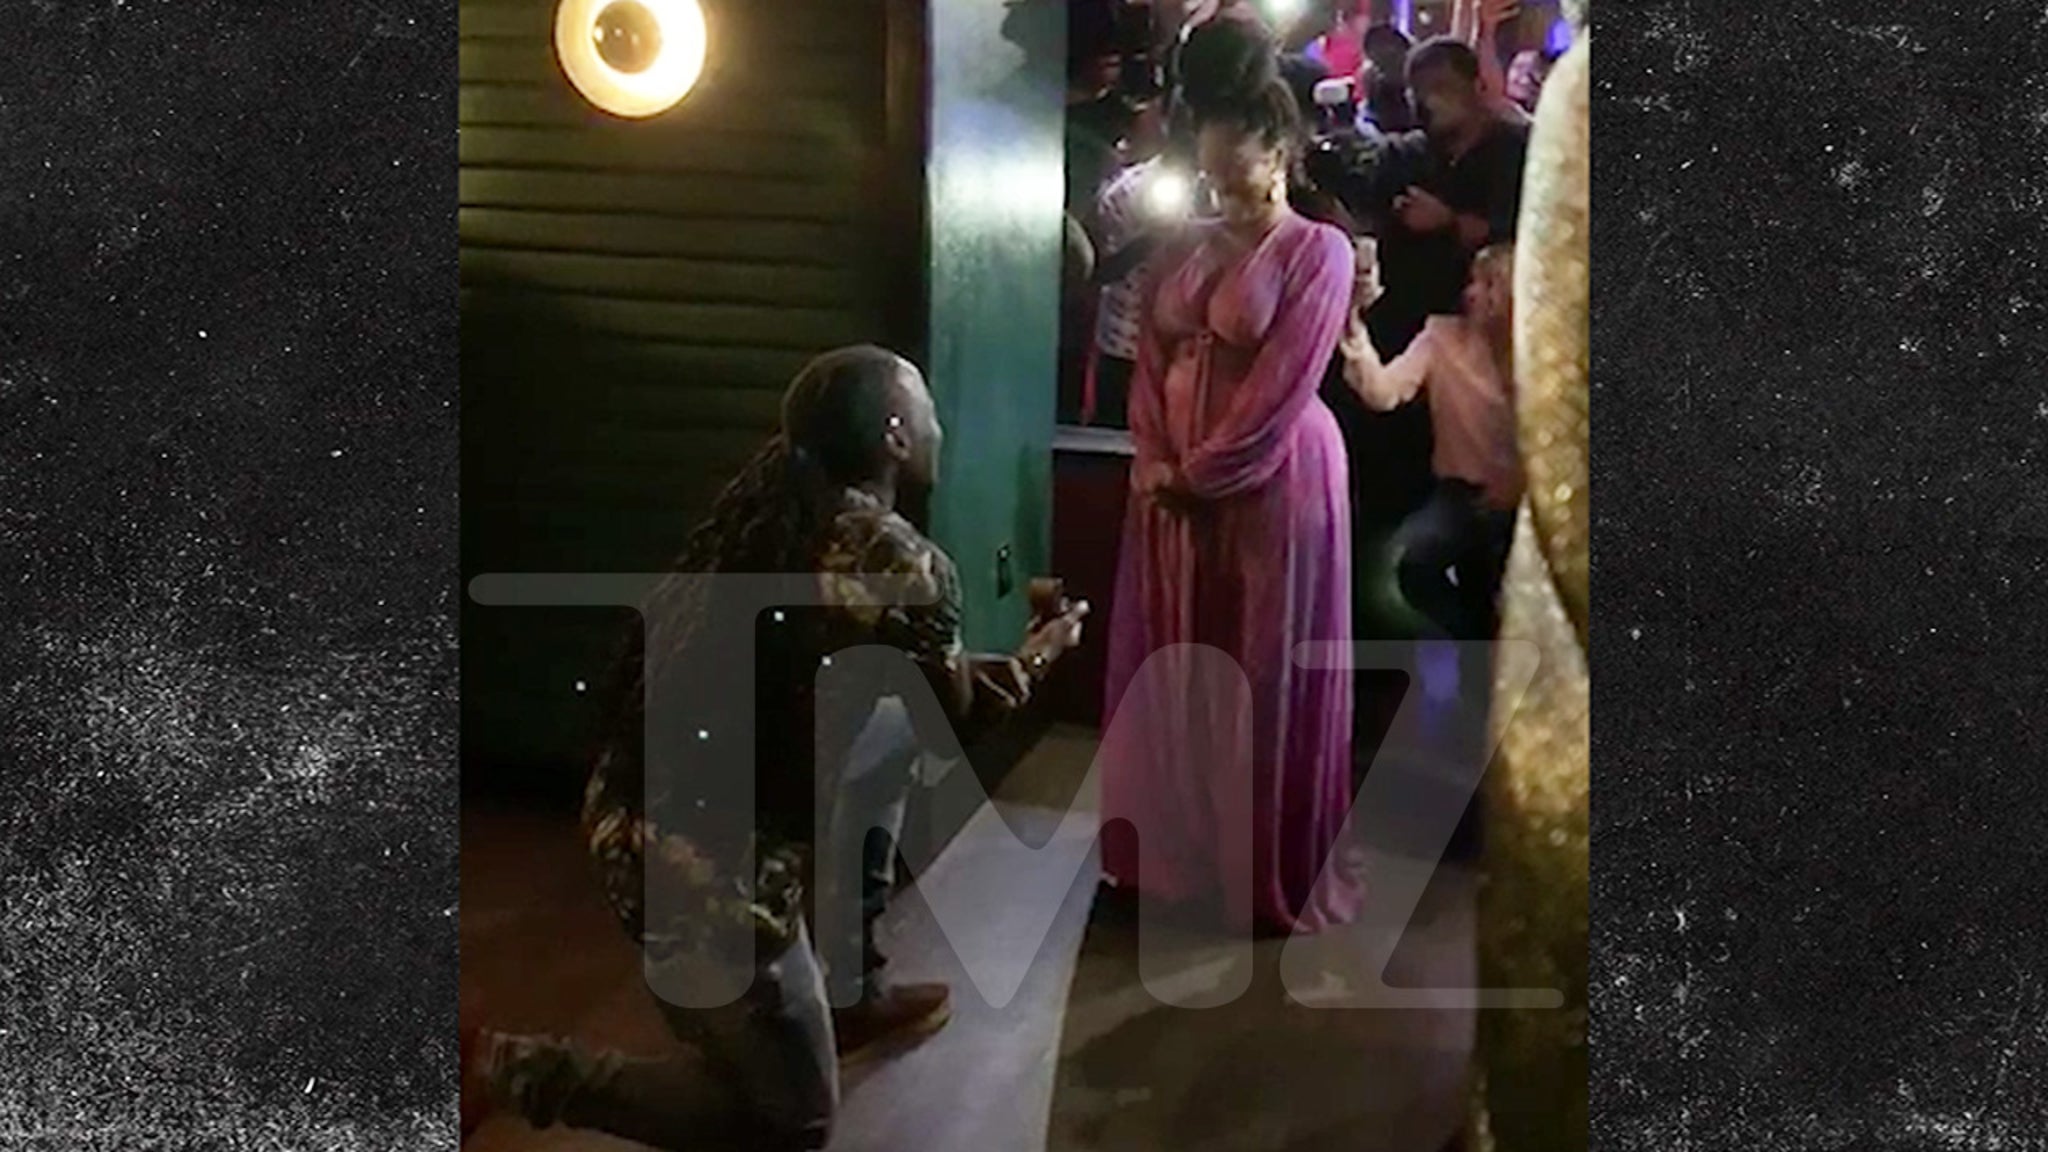 Rapper Ace Hood Proposes to GF with Beyonce Track Playing